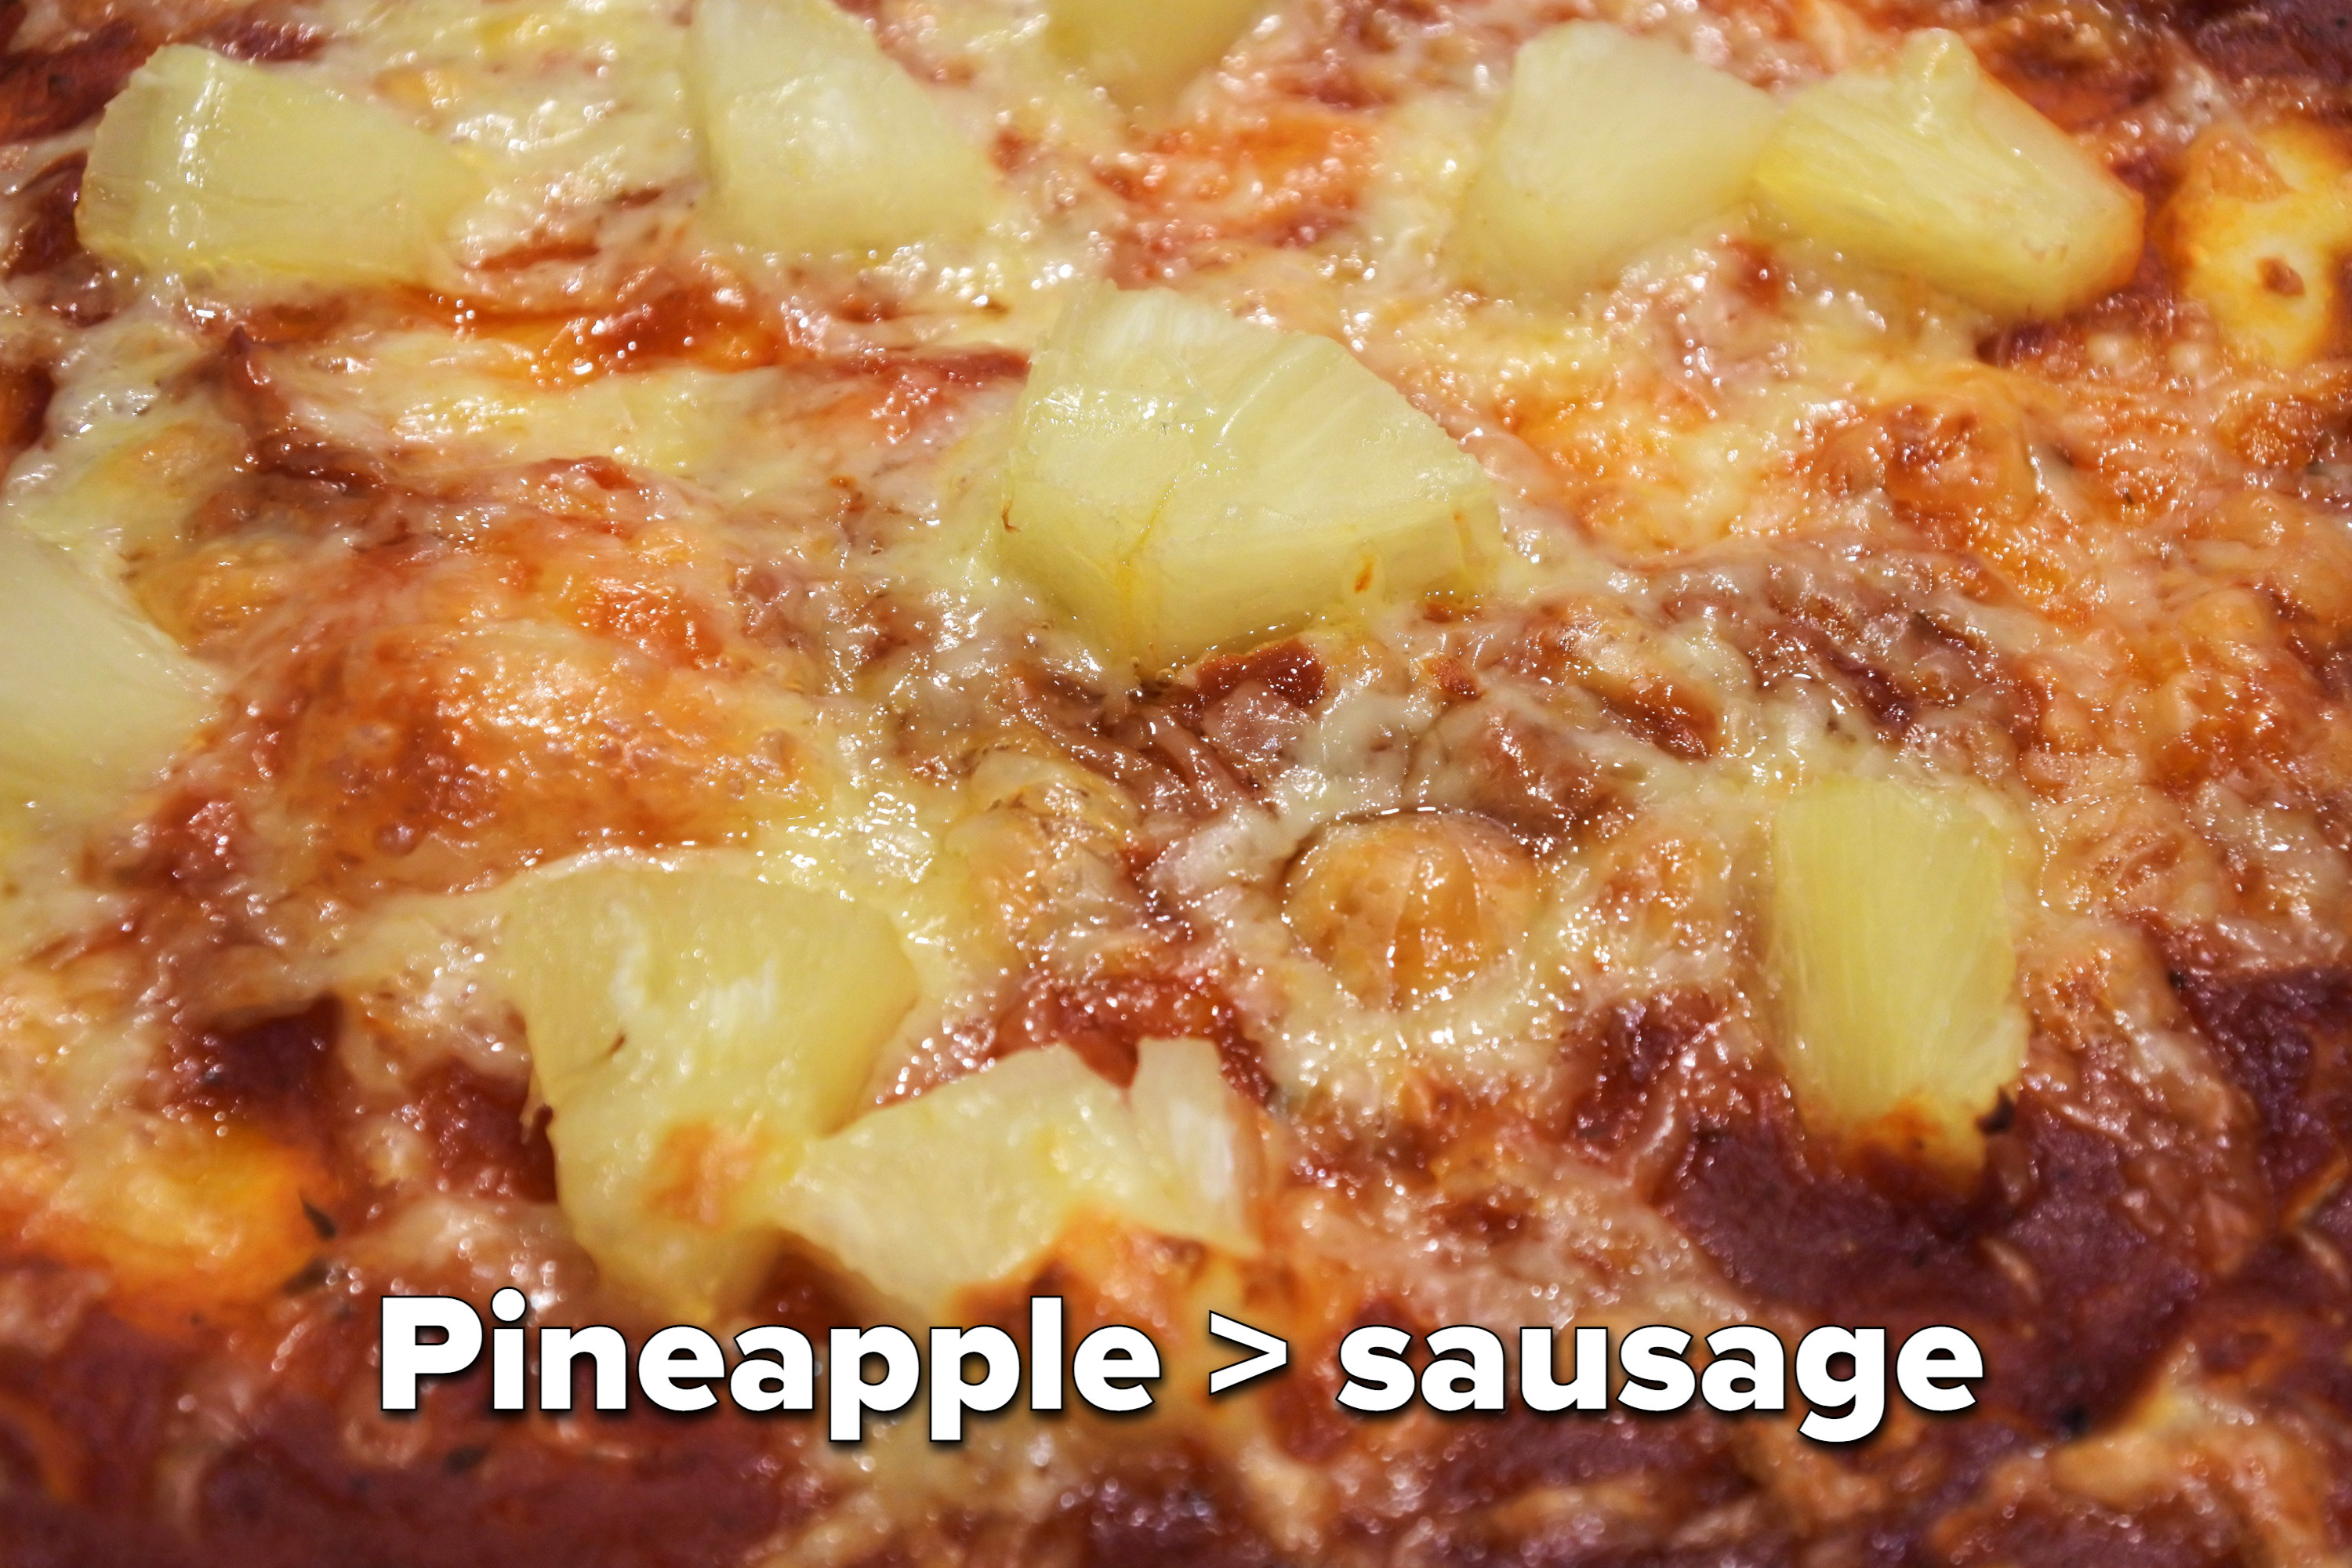 Cut-up pineapple on cheese pizza